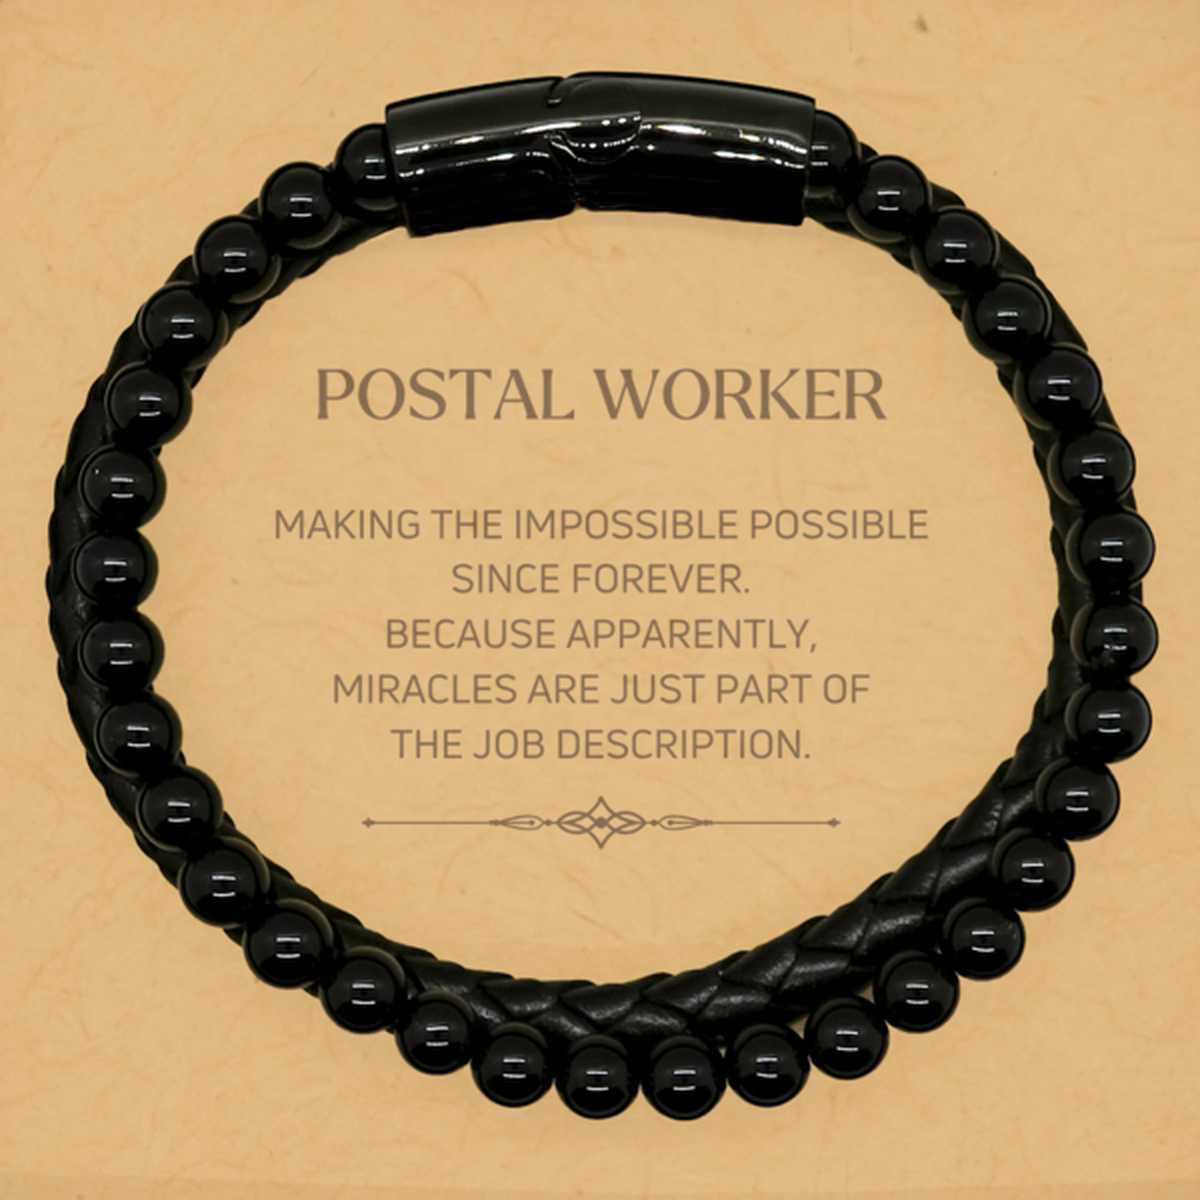 Funny Postal Worker Gifts, Miracles are just part of the job description, Inspirational Birthday Stone Leather Bracelets For Postal Worker, Men, Women, Coworkers, Friends, Boss